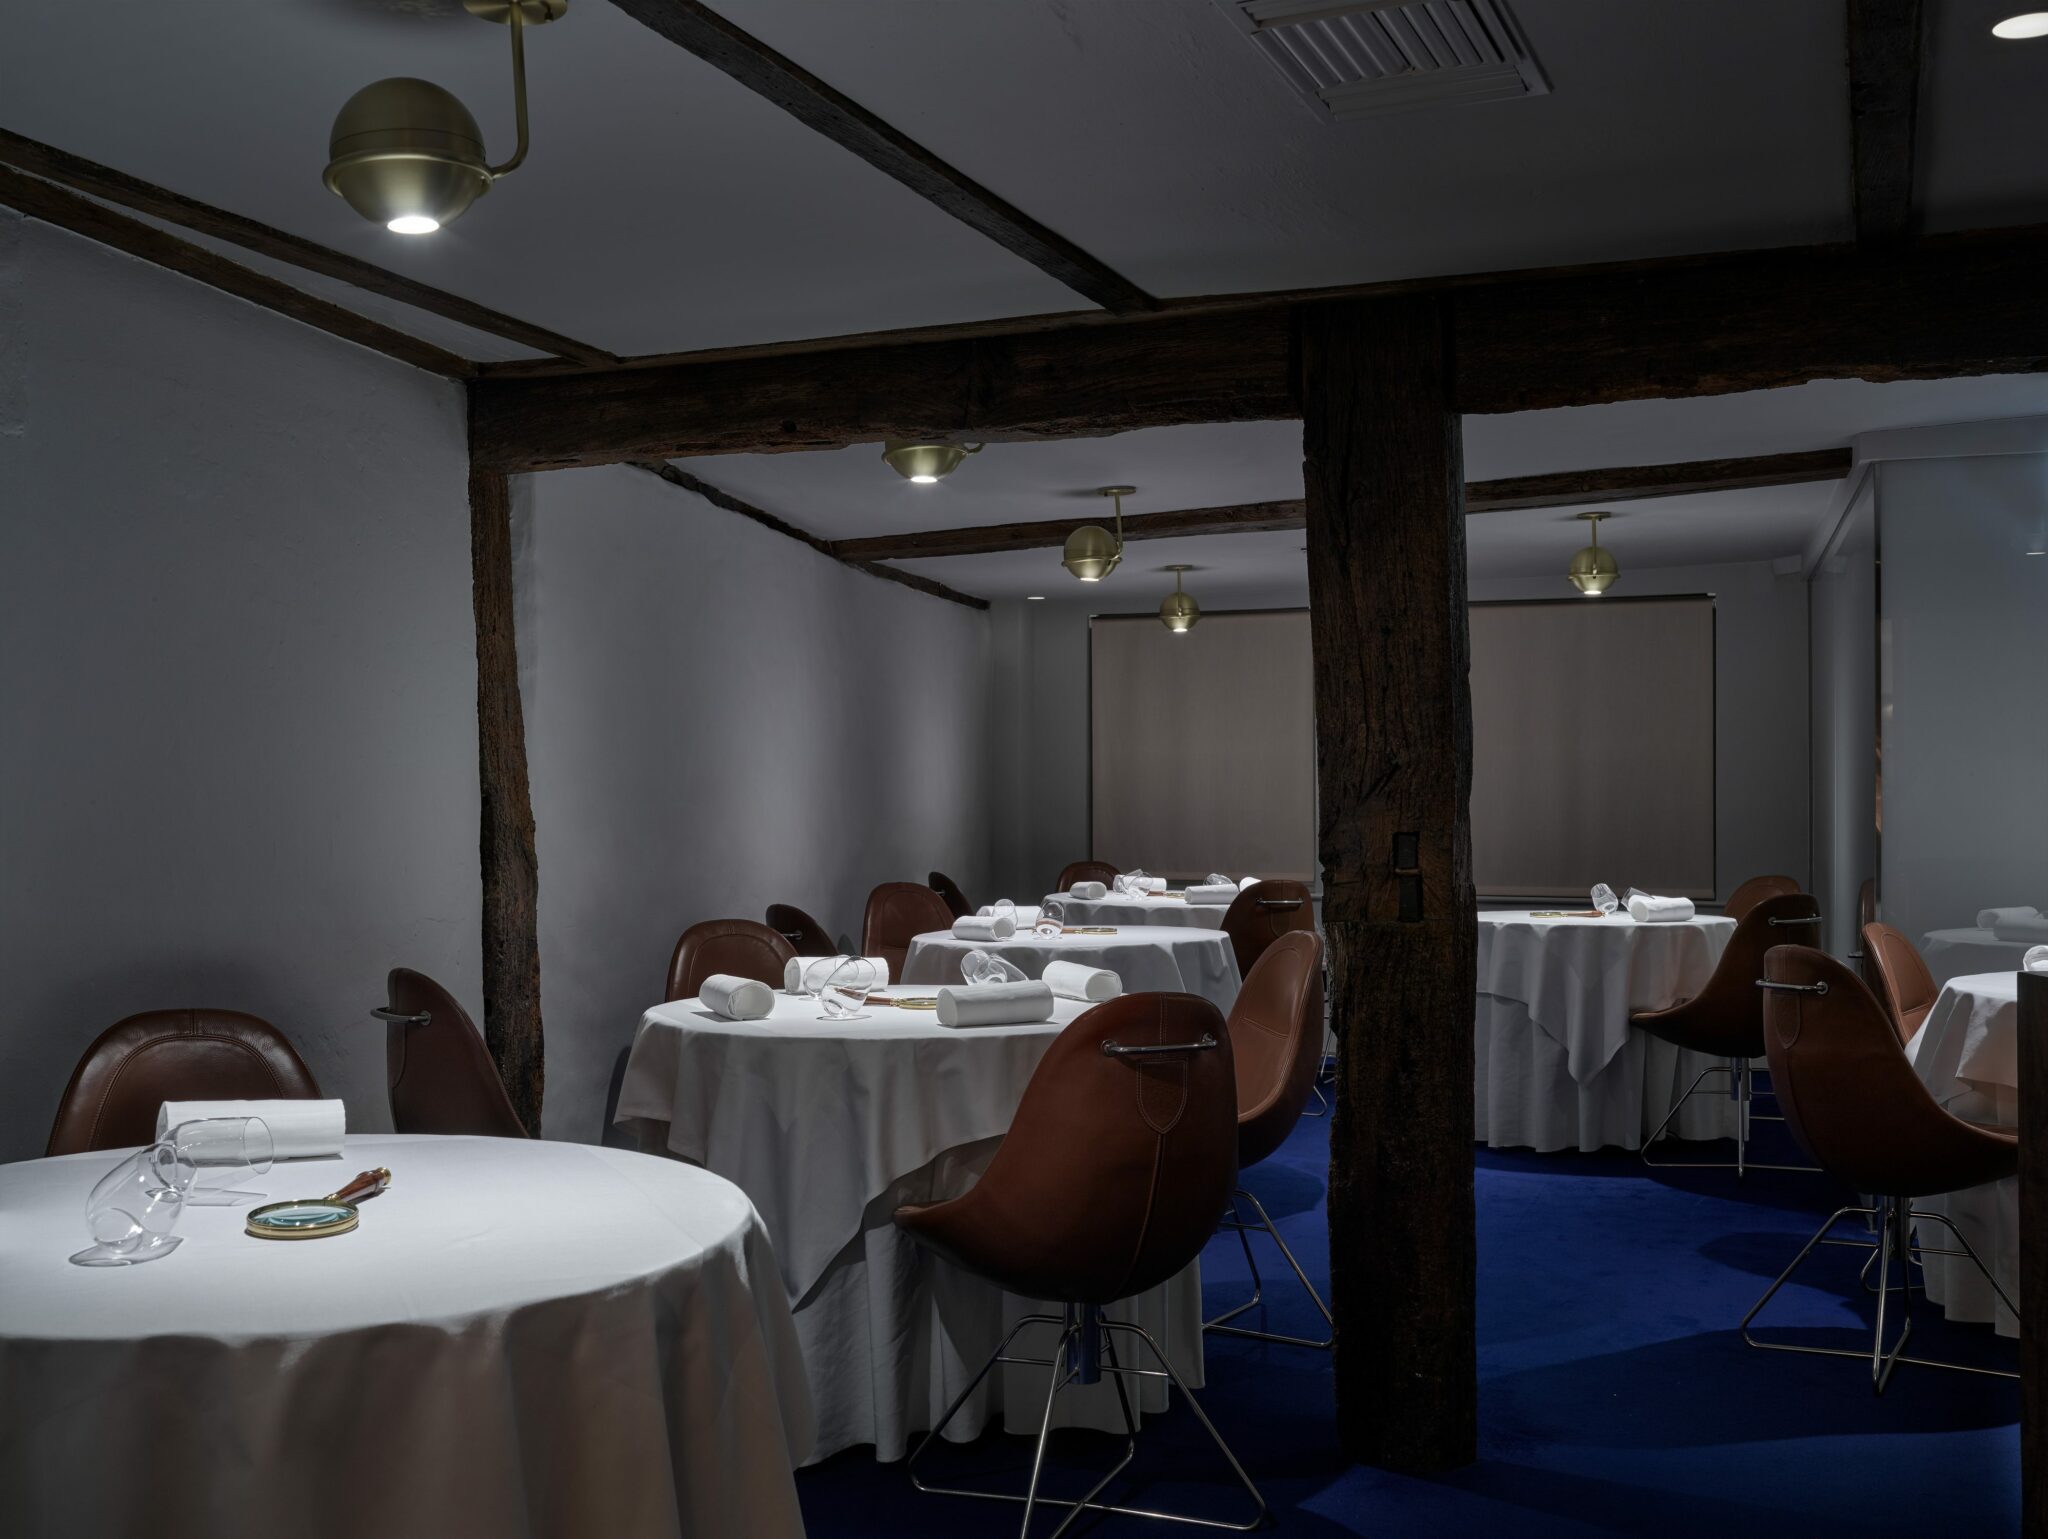 Image of the dining area in the Fat Duck